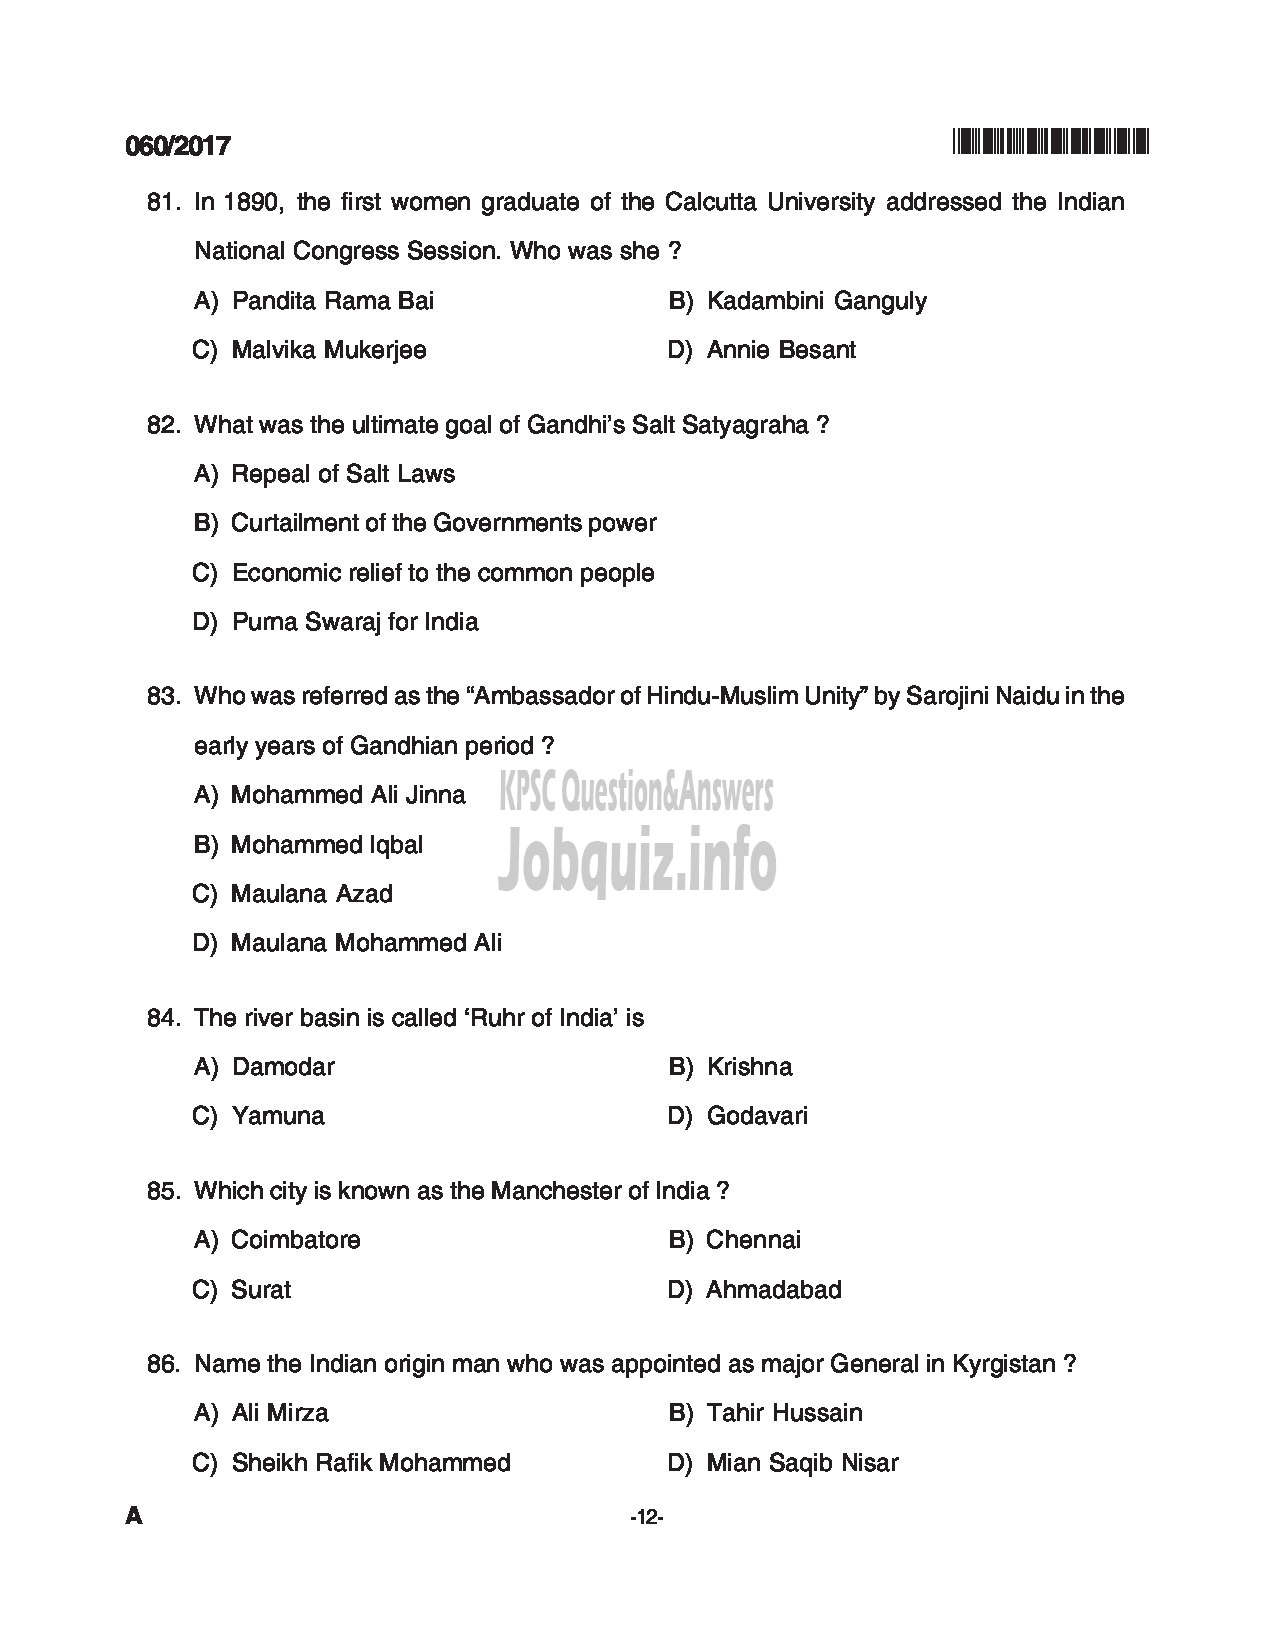 Kerala PSC Question Paper - TRADESMAN COMPUTER ENGINEERING TECHNICAL EDUCATION QUESTION PAPER-12